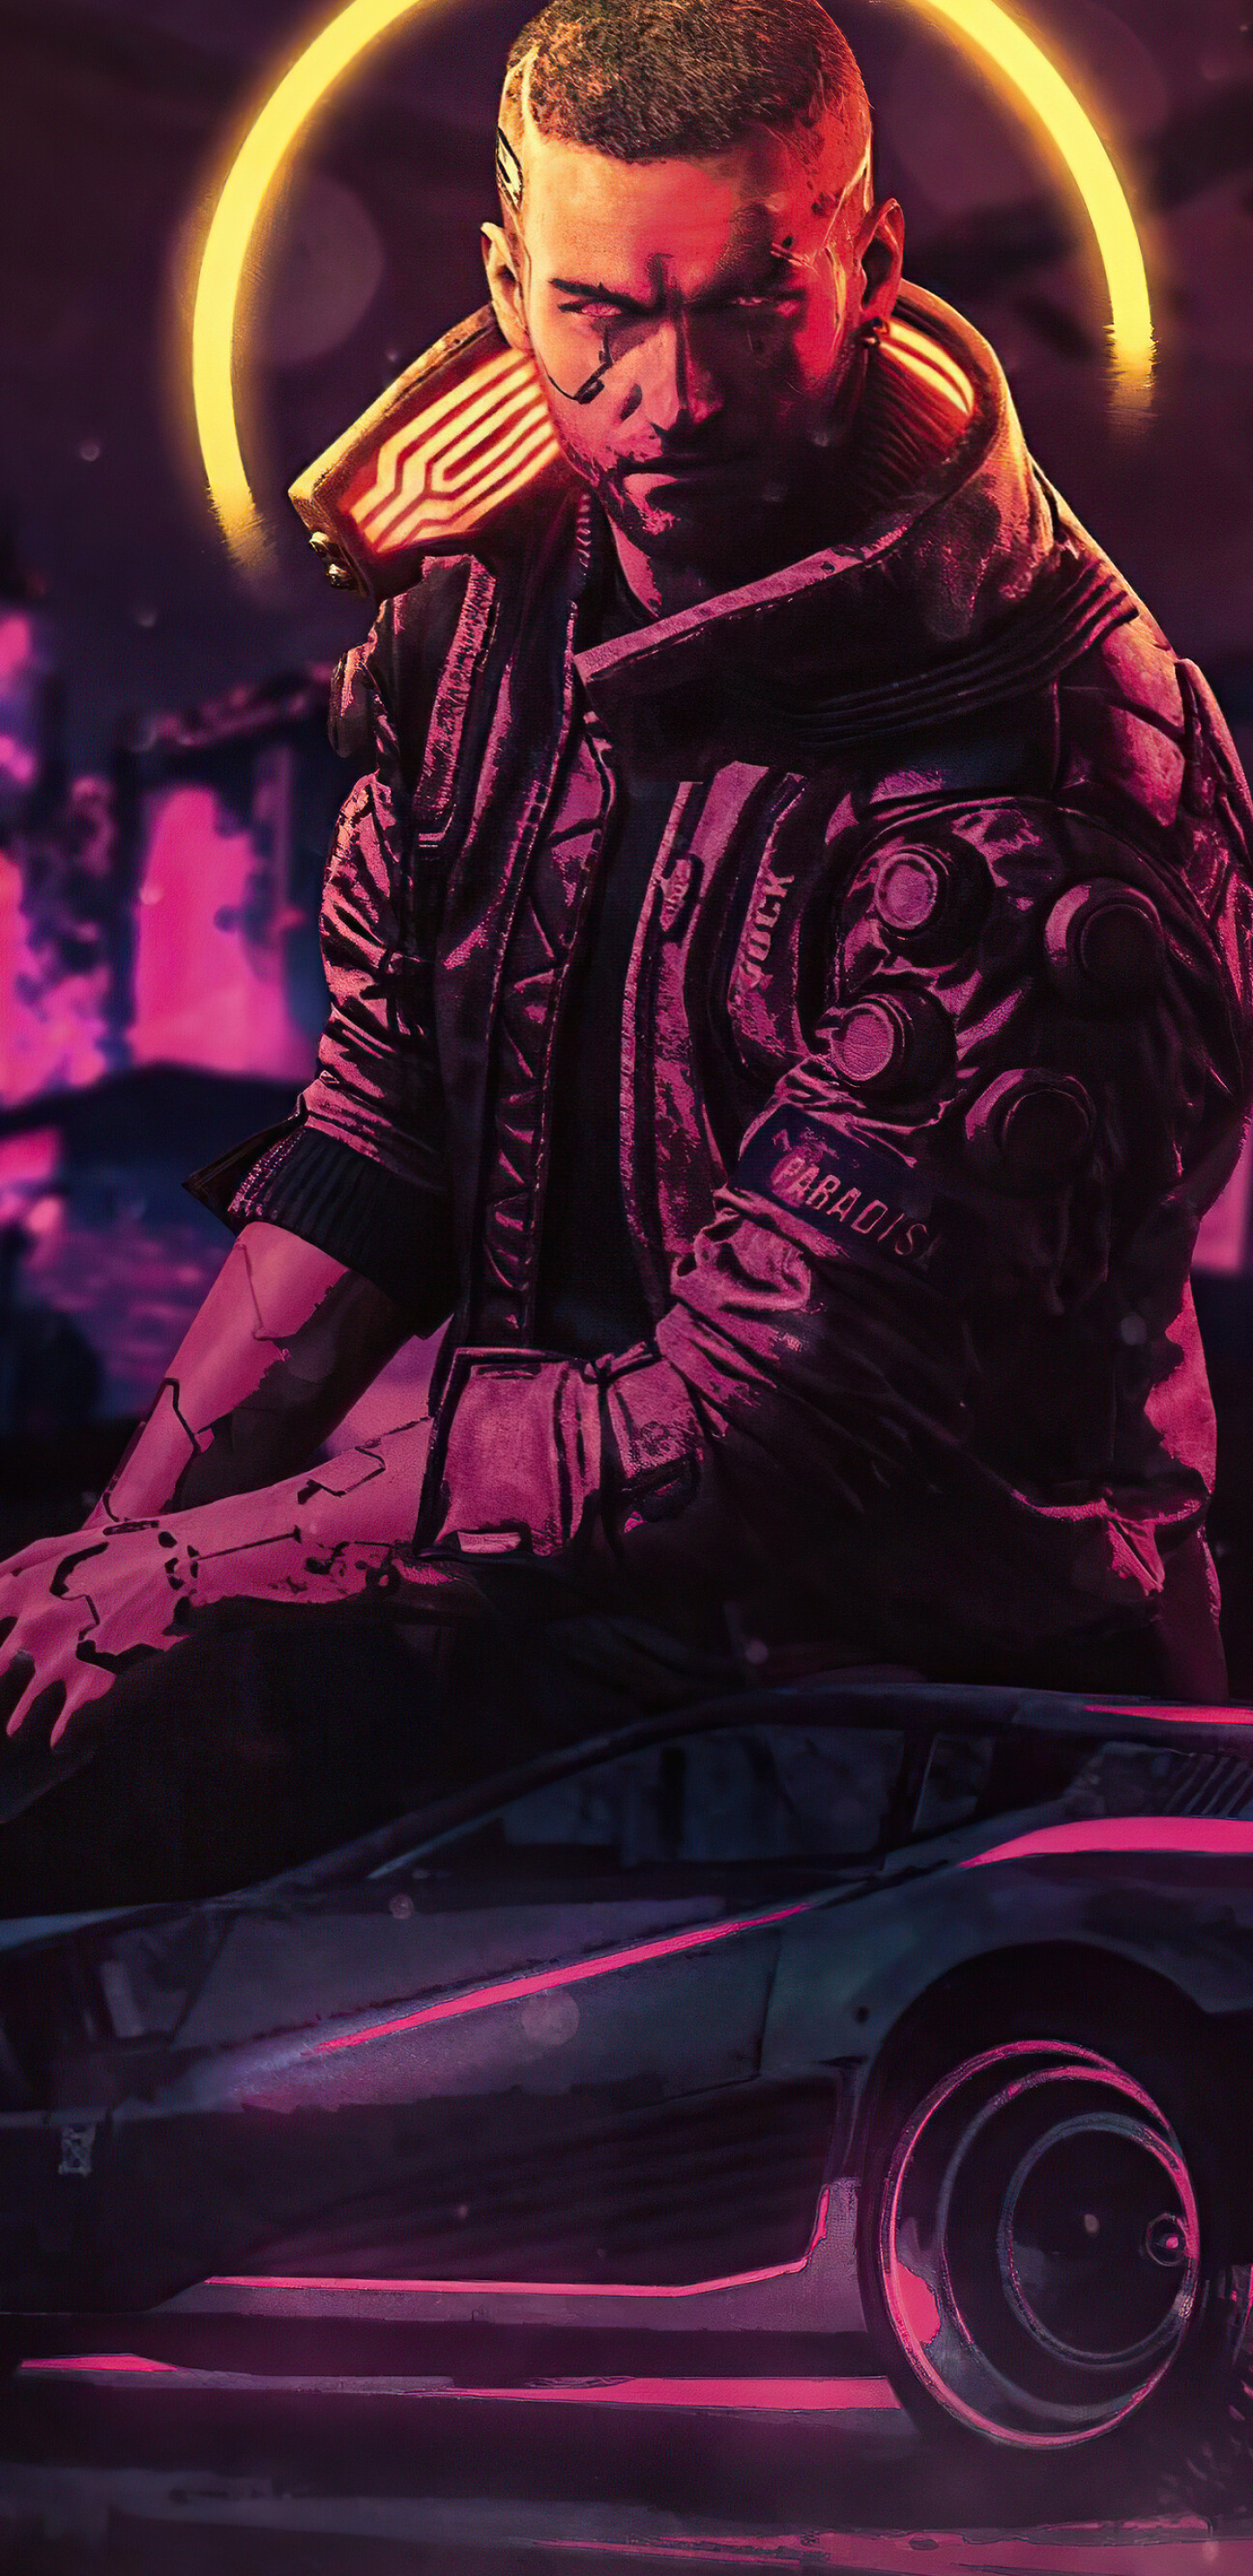 Cyberpunk 2077: Critics praised the quality of the story as well as the depth and expansiveness of side quests, the immersive atmosphere of the world, the visual quality, and freshness of the cyberpunk setting. 1440x2960 HD Wallpaper.